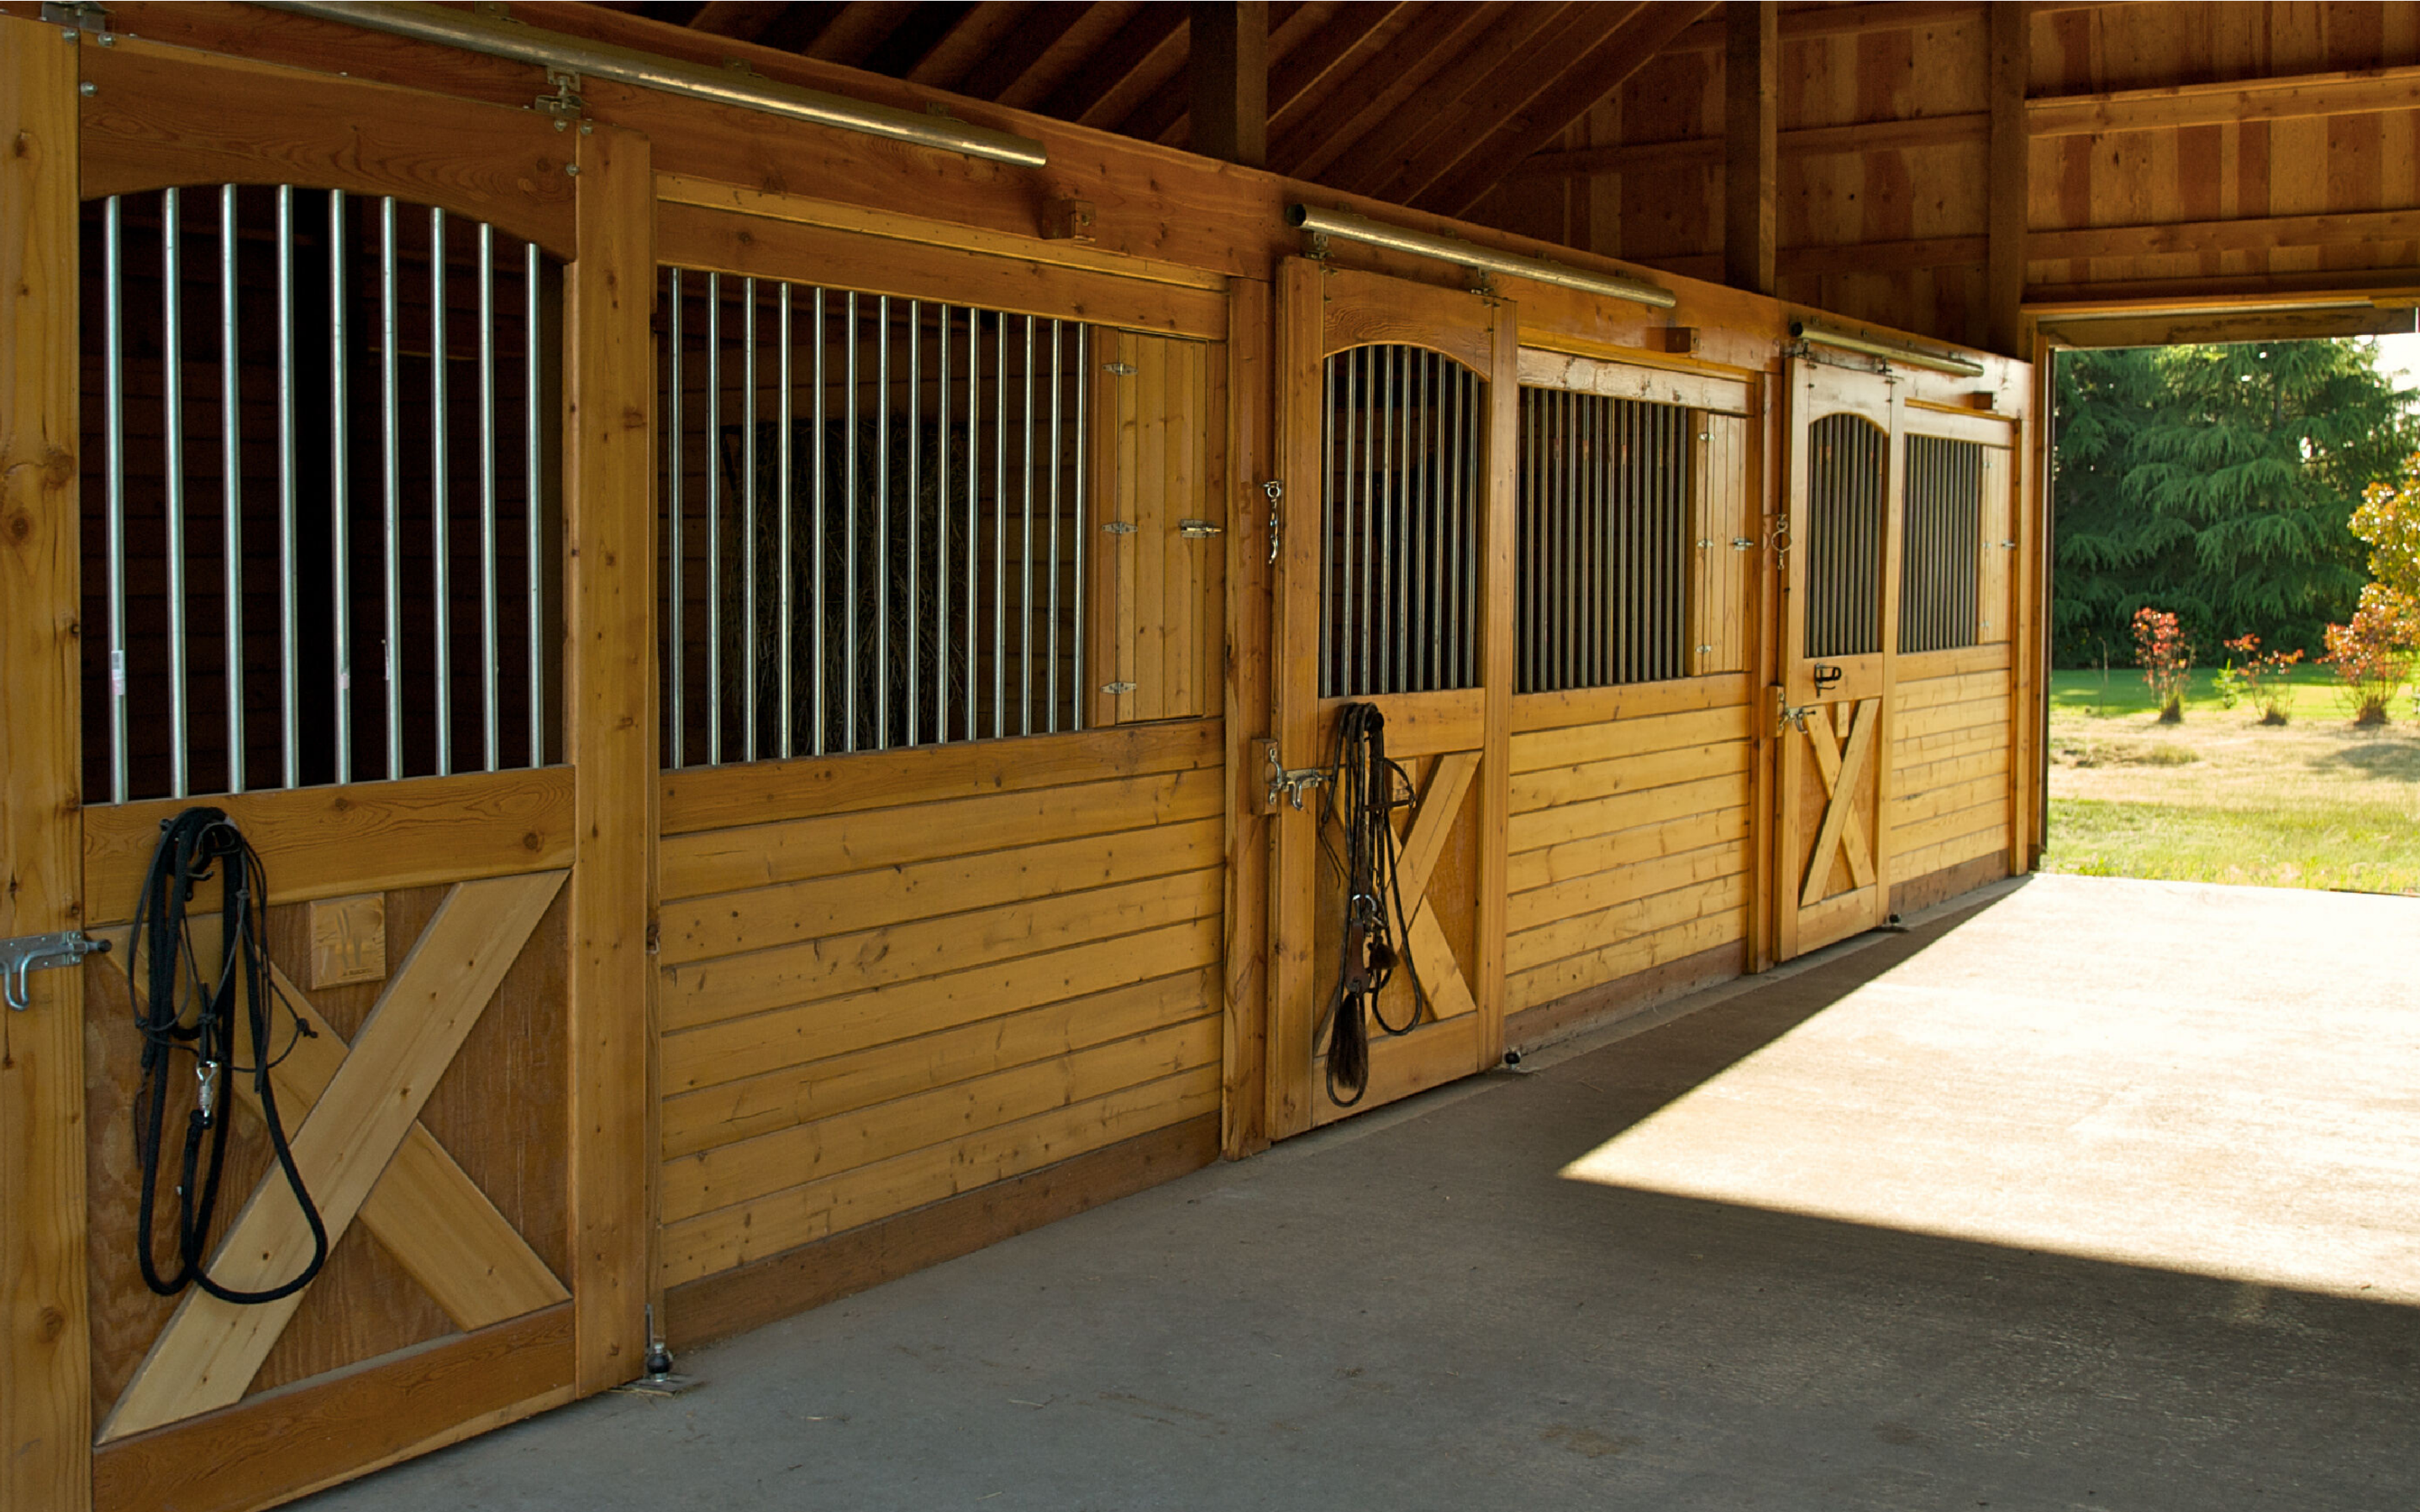 What Does It Cost to Build an Equestrian Facility?